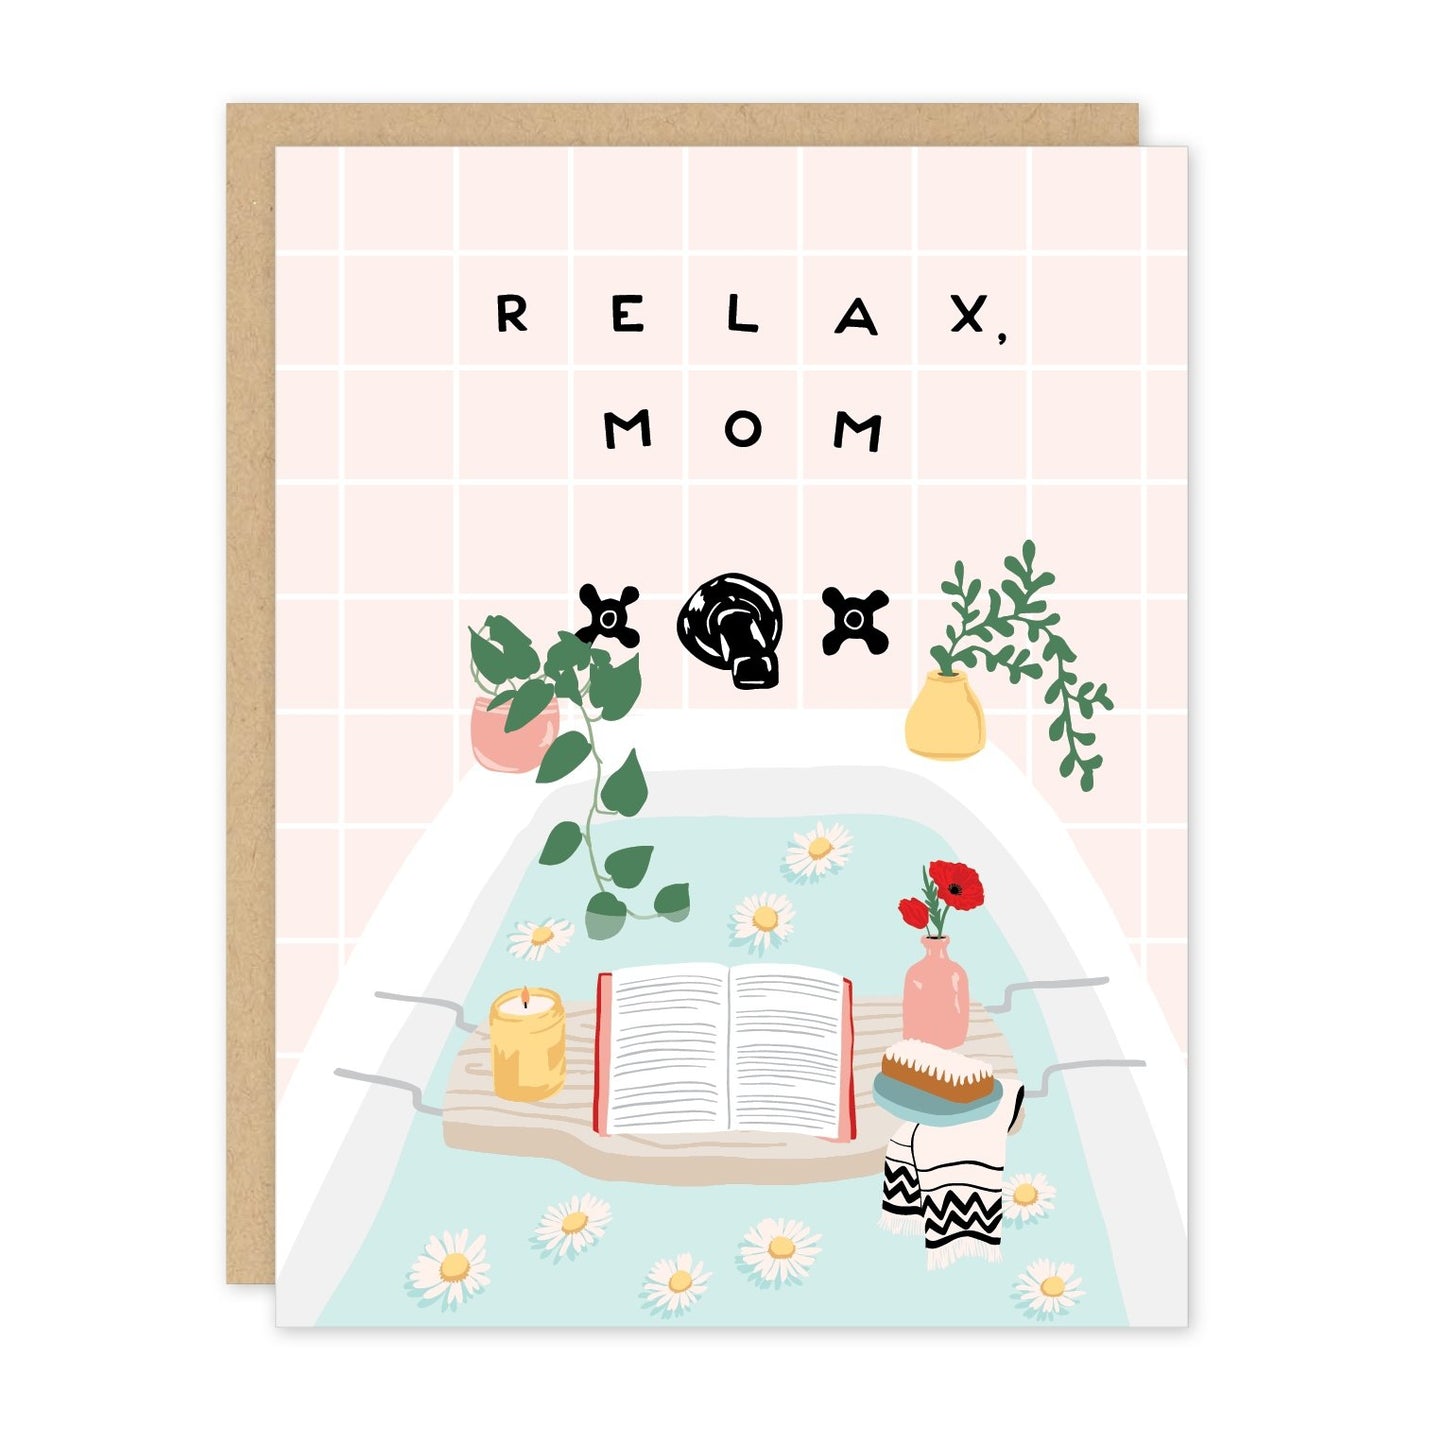 Relax Mom Greeting Card | Blank Inside for Mother's Day, Birthday, Etc